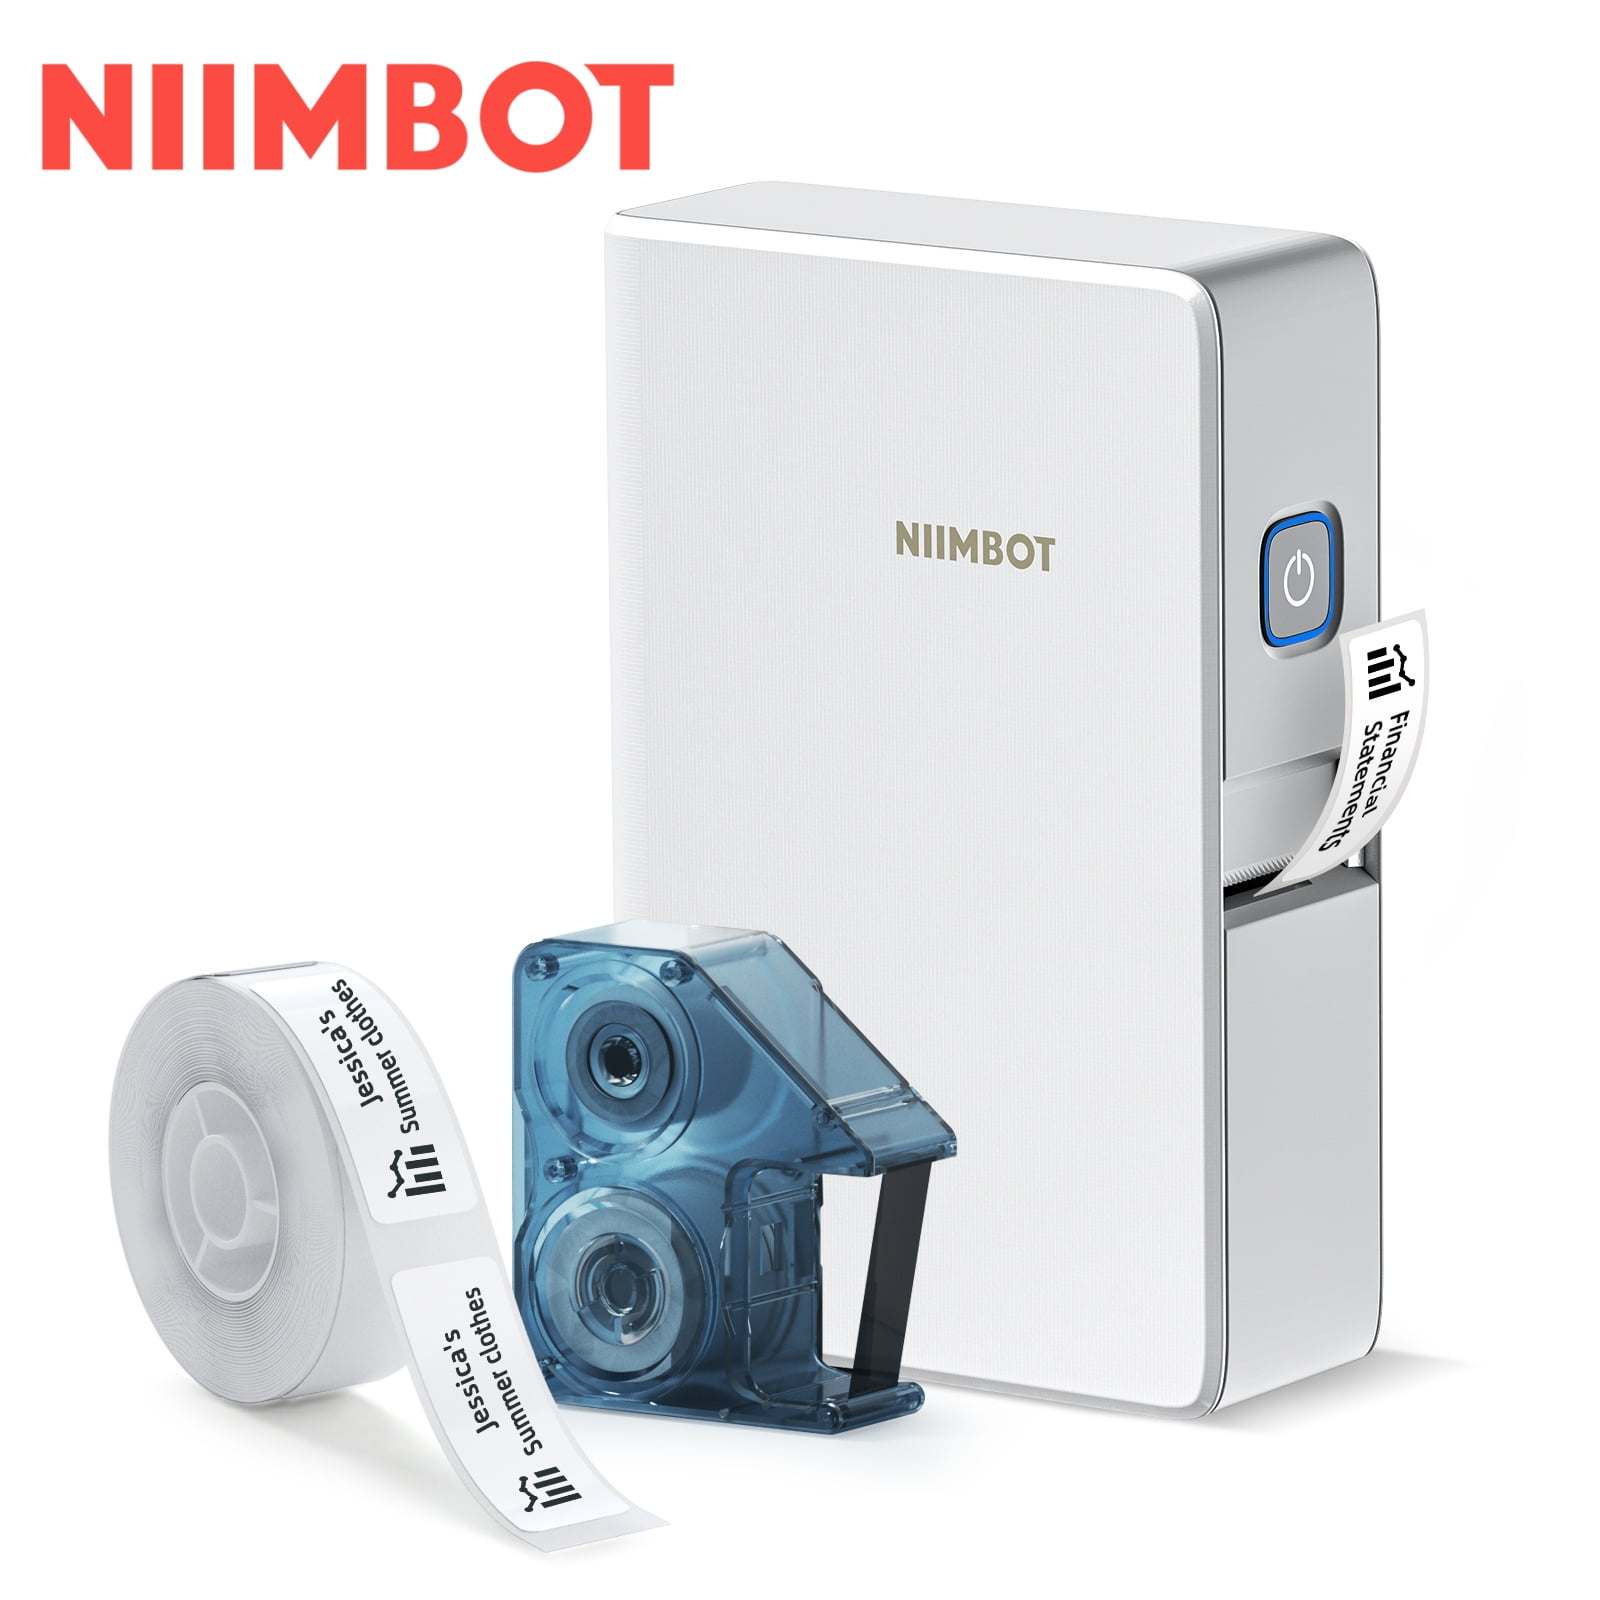 NIIMBOT Label Maker B18 Mini Thermal Transfer Label Printer with Black Ribbon Cartridge and Labels for Indoor/Outdoor Identification, Support Color Printing Wireless Bluetooth Rechargeable - Walmart.com